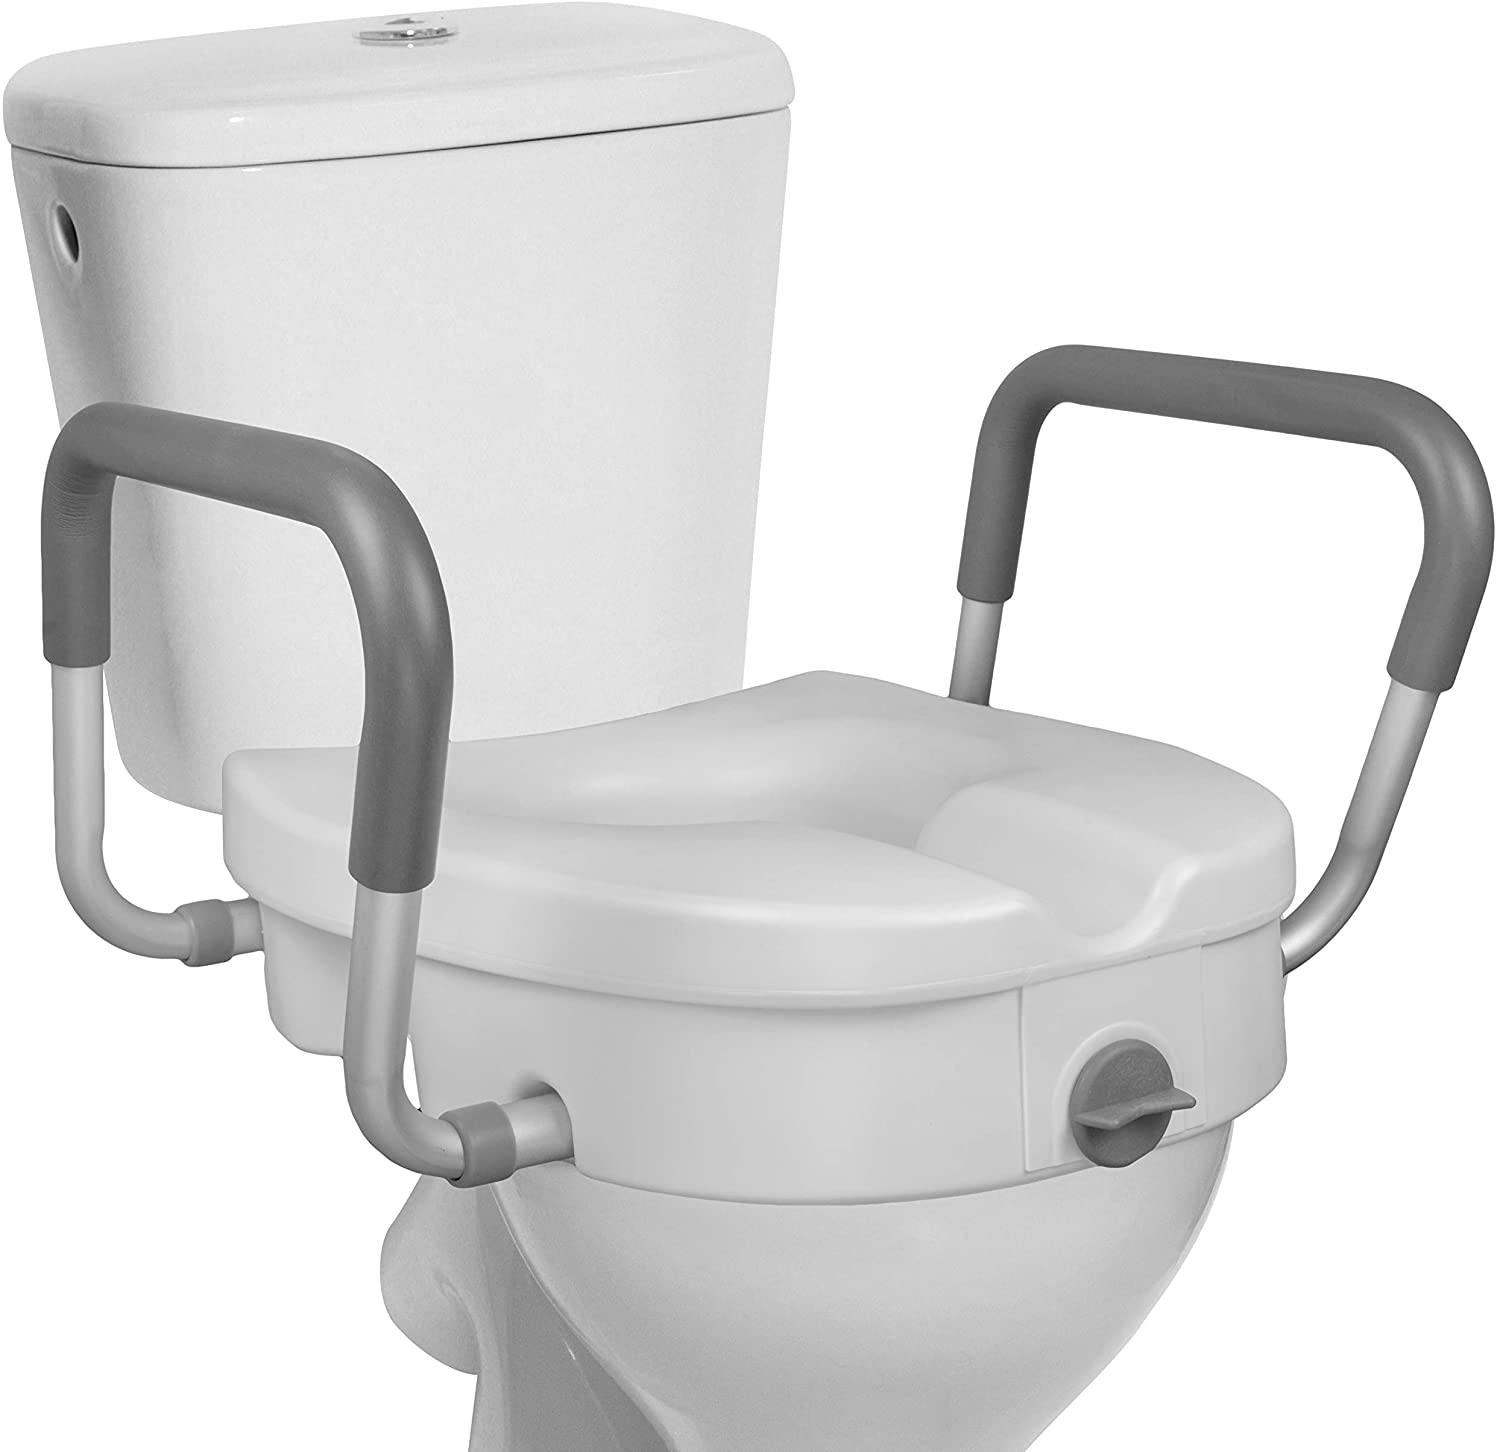 Durable Medical Equipment Raised Toilet Seat, with handles (weight capacity up to 300lbs)